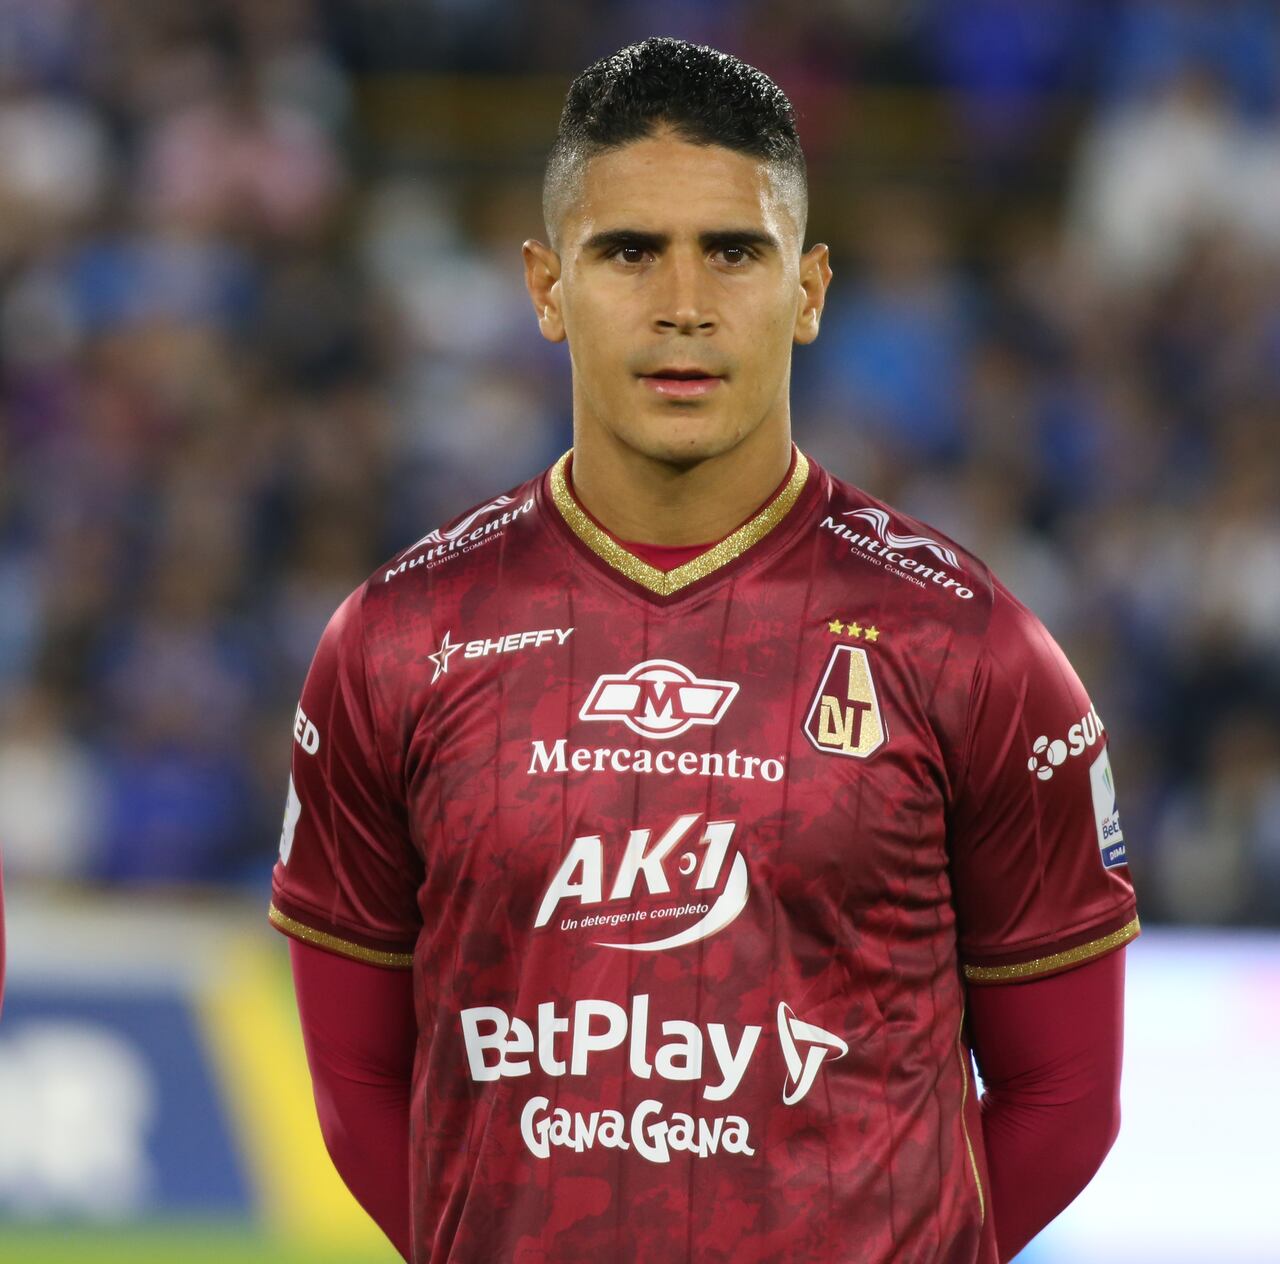 Daniel Cataño of Tolima, before the match of Millonarios vs. Tolima of the BetPlay DIMAYOR League at the Estadio Nemesio Camacho El Campin stadium in the city of Bogota, Colombia on May 8, 2022, match that would end 0 - 0. (Photo by Daniel Garzon Herazo/NurPhoto via Getty Images)